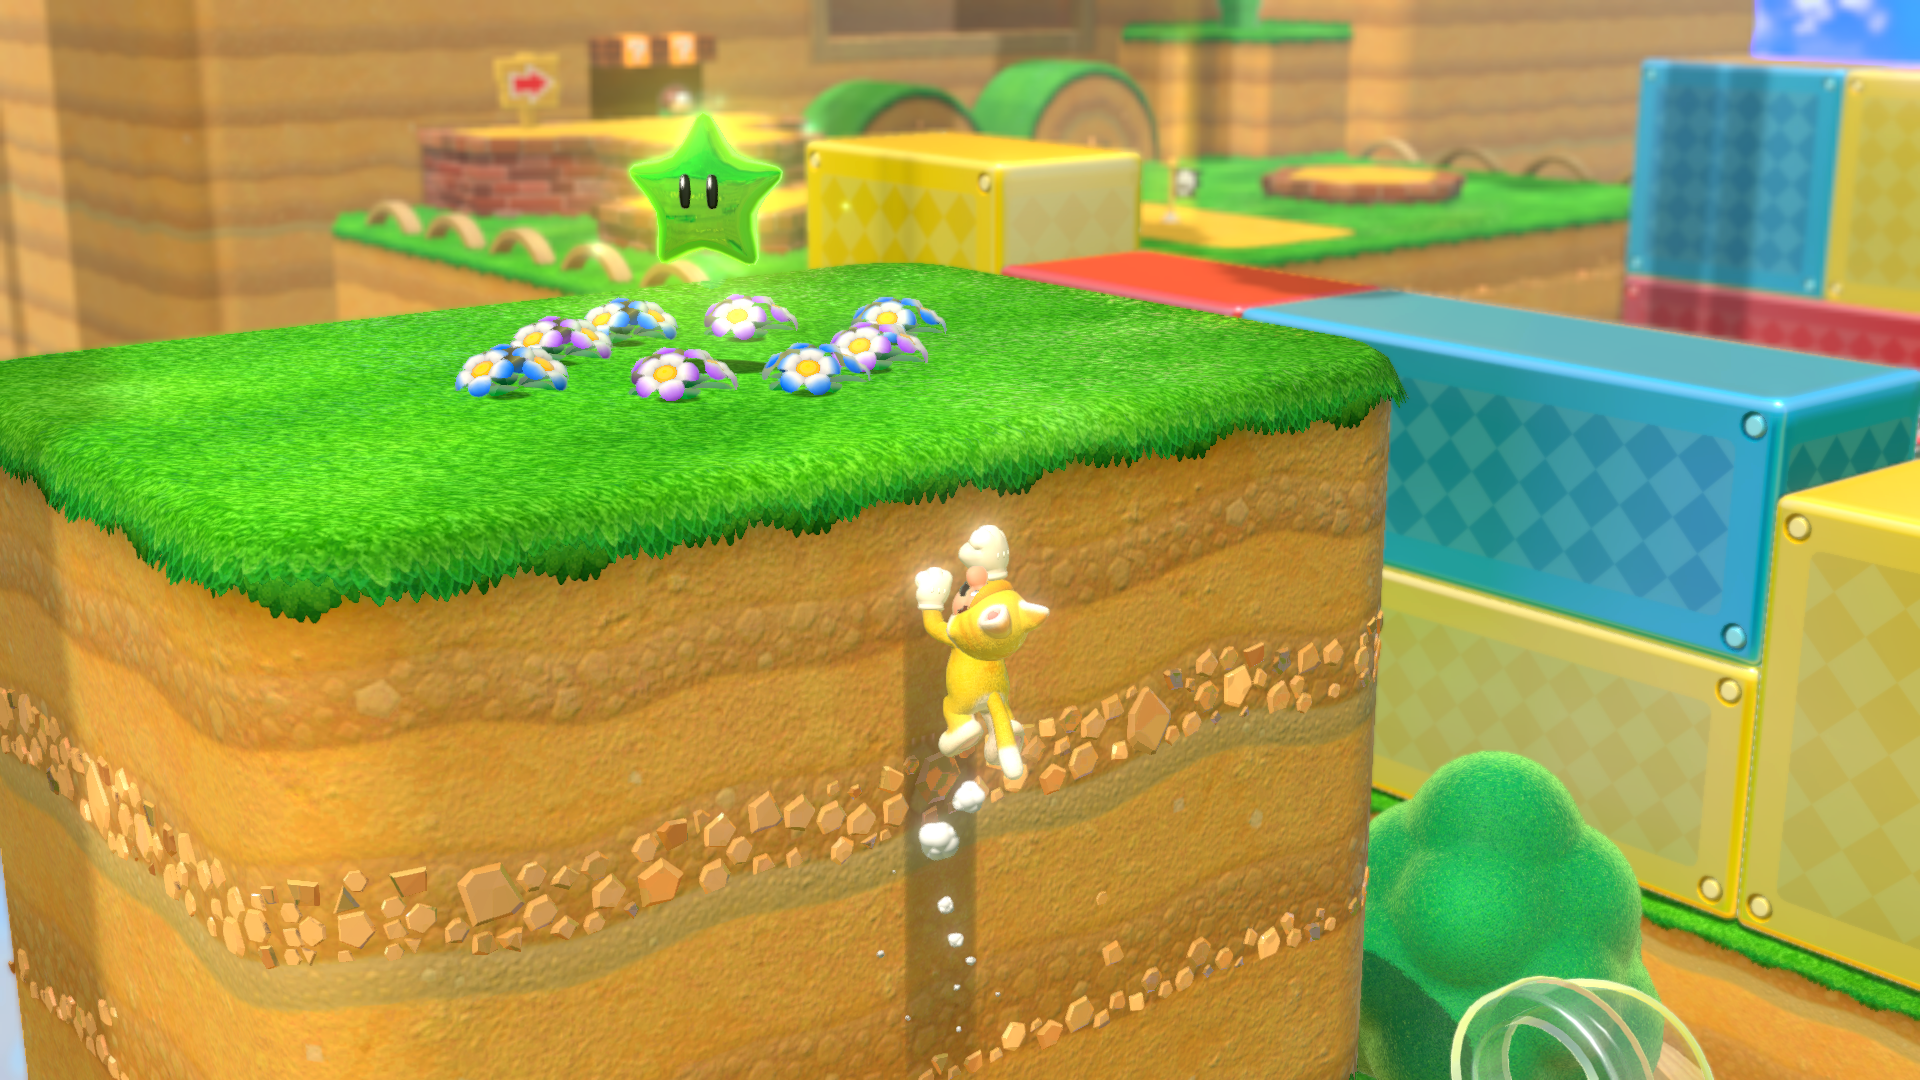 Super Mario 3D World on Switch is a must-play gem.